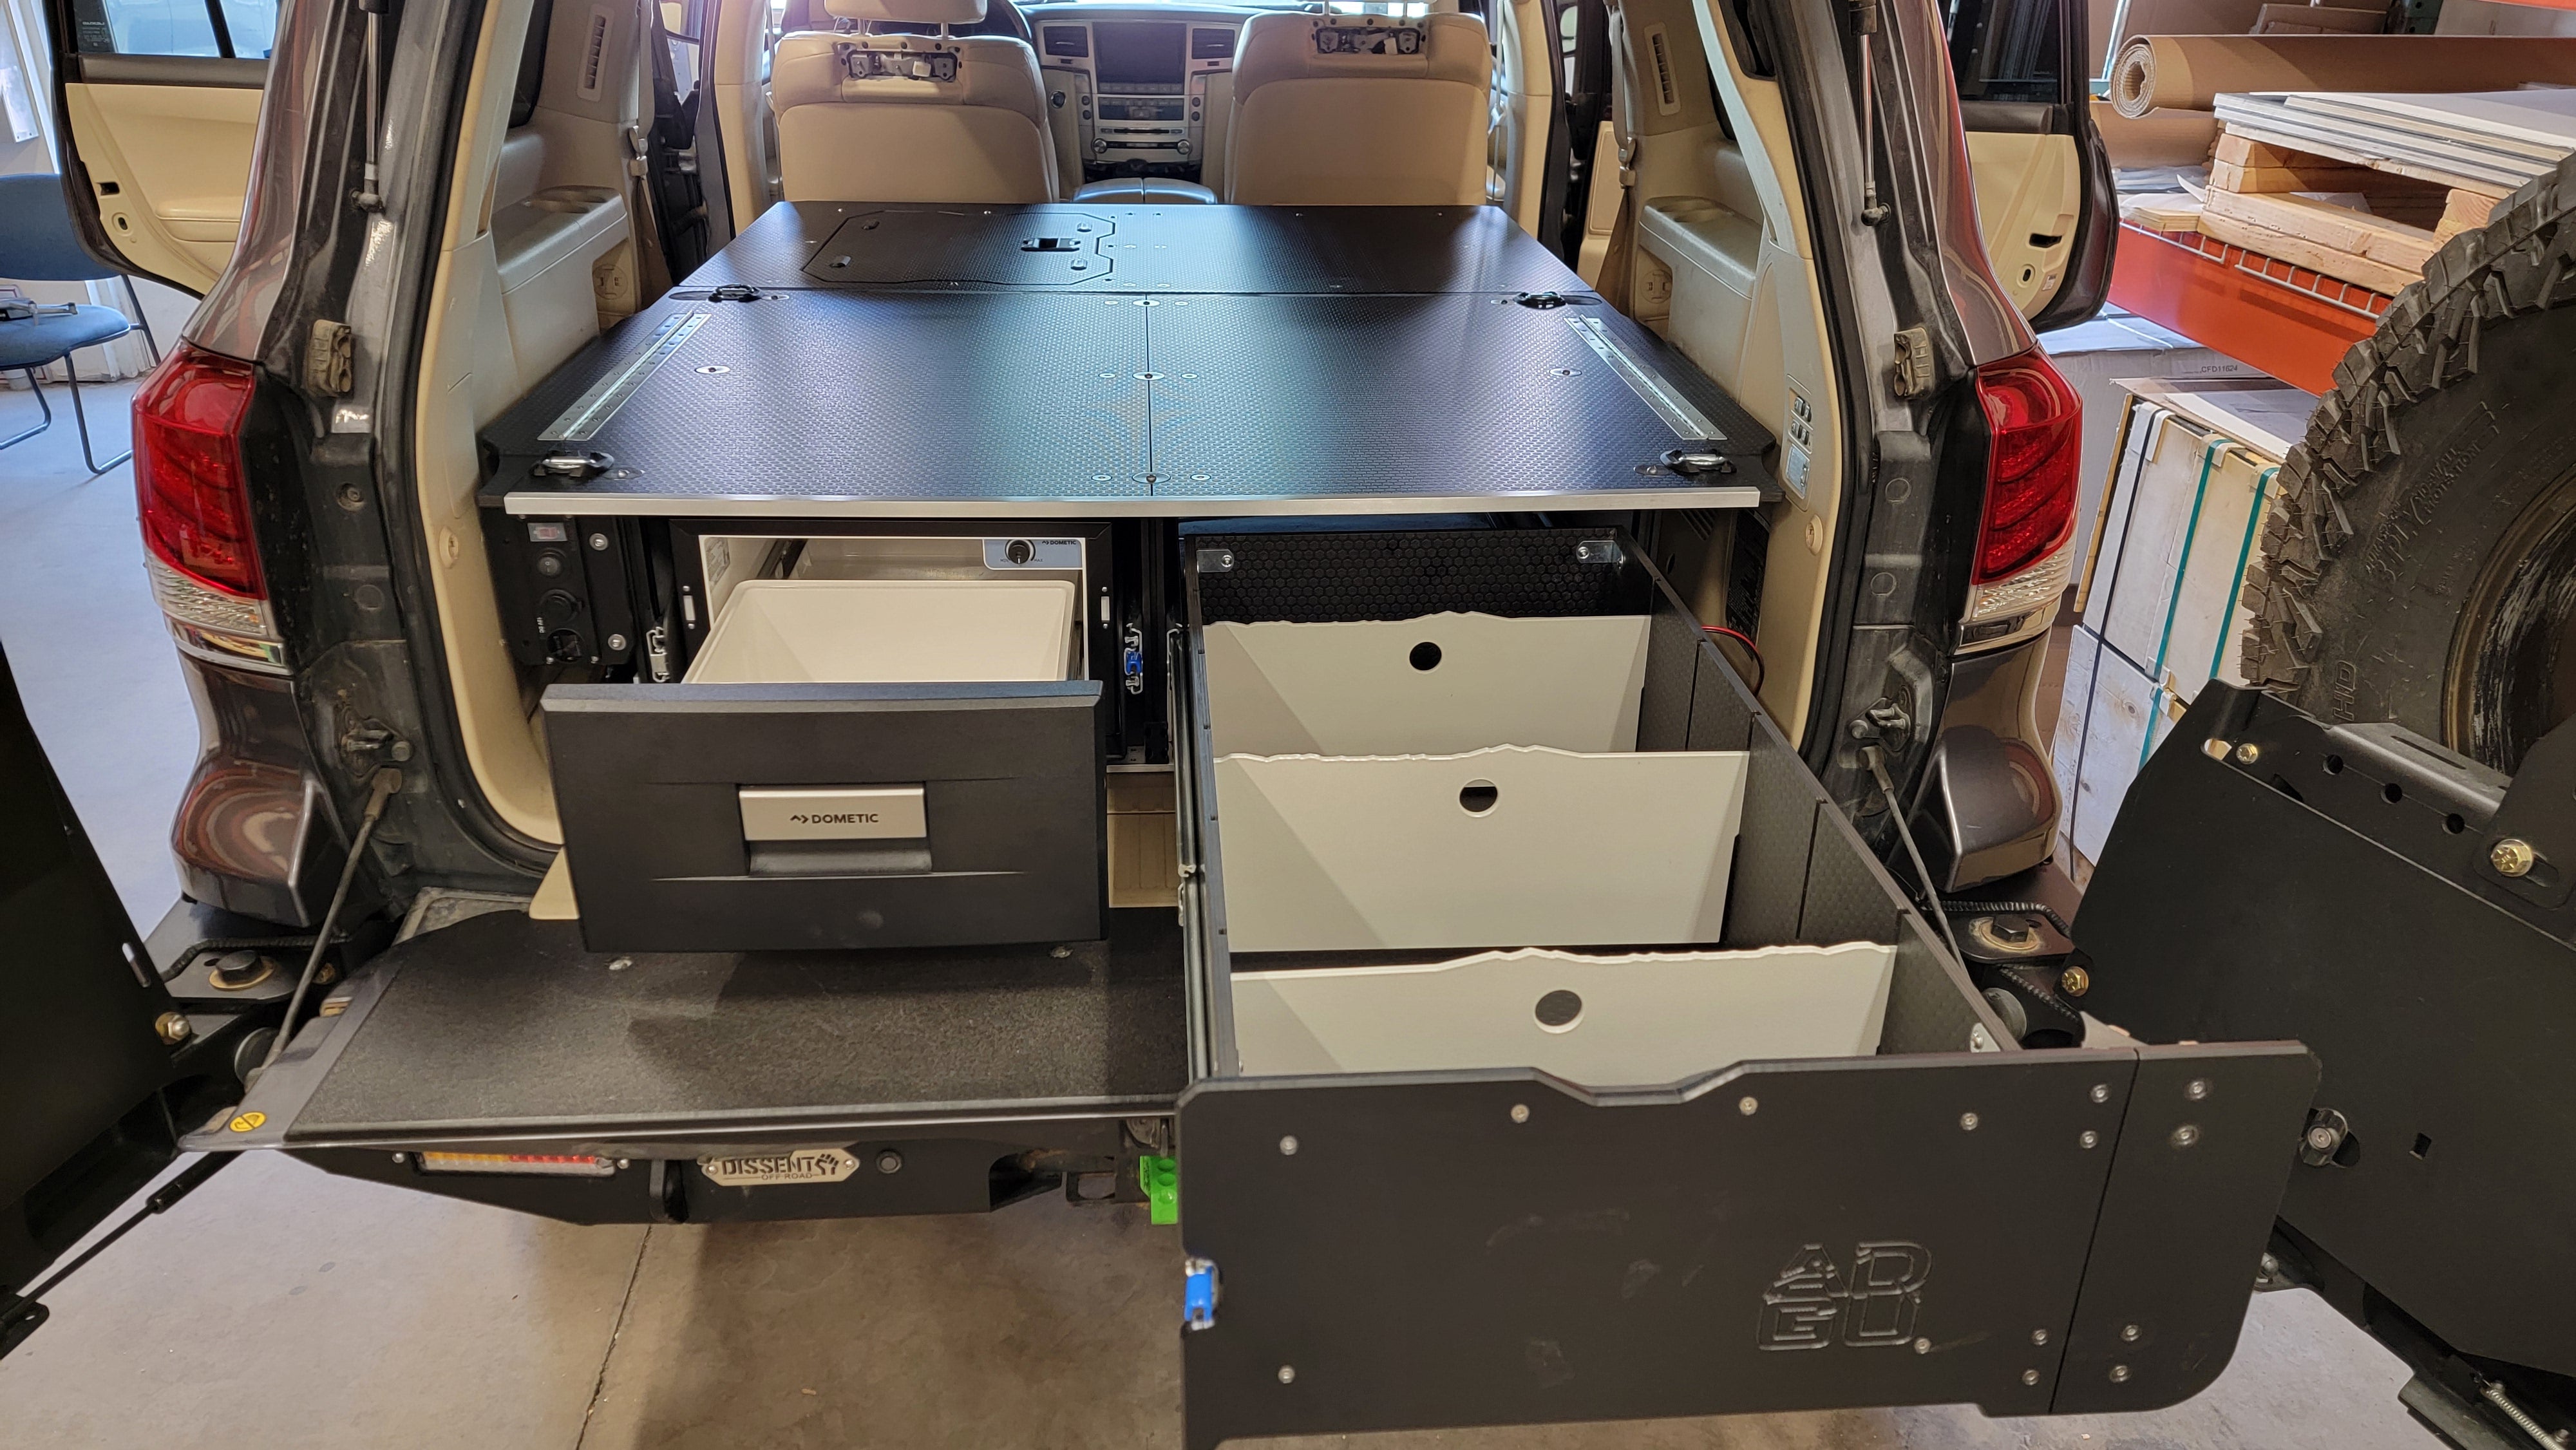 200 Series Toyota Land Cruiser LX570 drawer system with fridge and sleeping platform for vehicle organization perfect for overland travel.